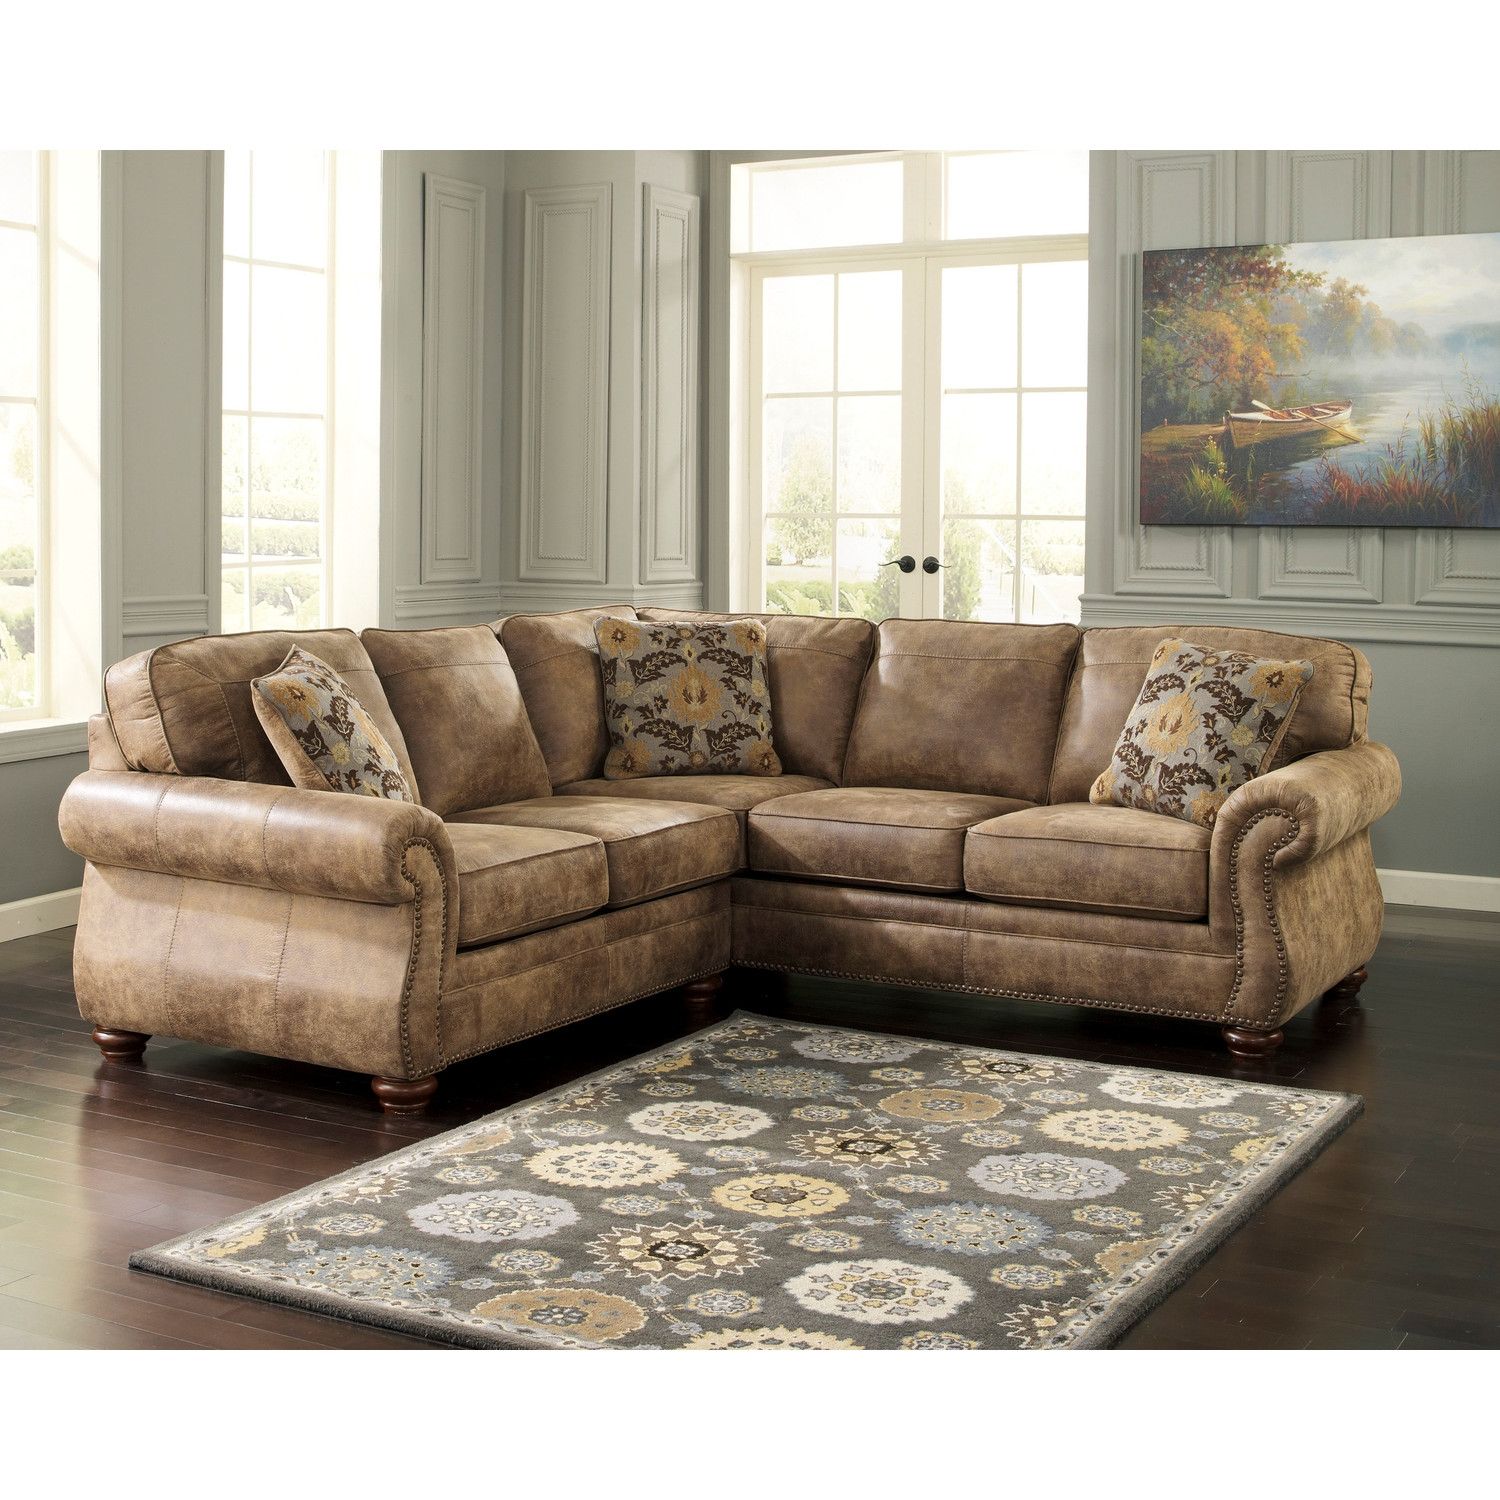 Small Sectional Sofa With Chaise Small Sectional Sofa With Chaise Pertaining To Small Sectional Sofa (Photo 4 of 12)